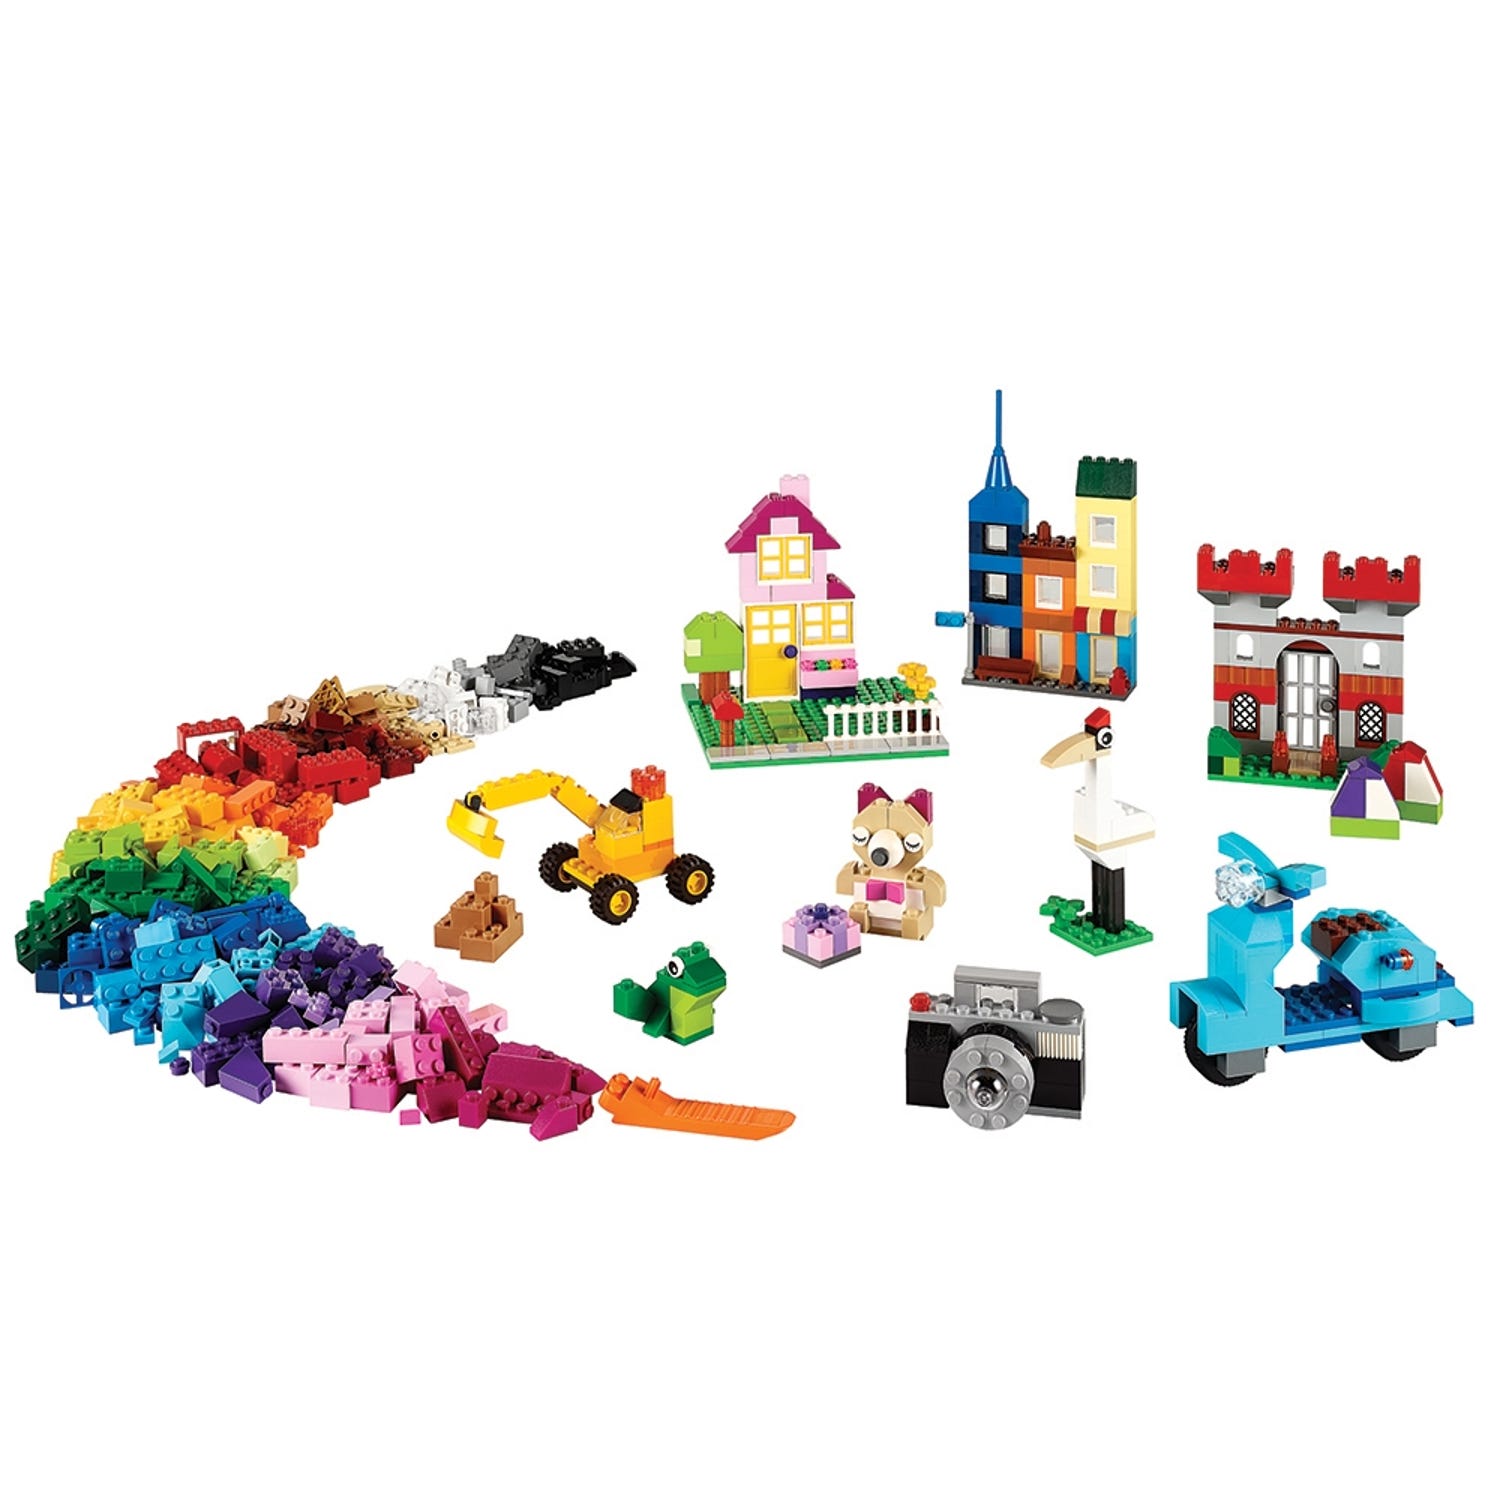 LEGO® Large Brick Box 10698 | Classic Buy at the Official LEGO® Shop US